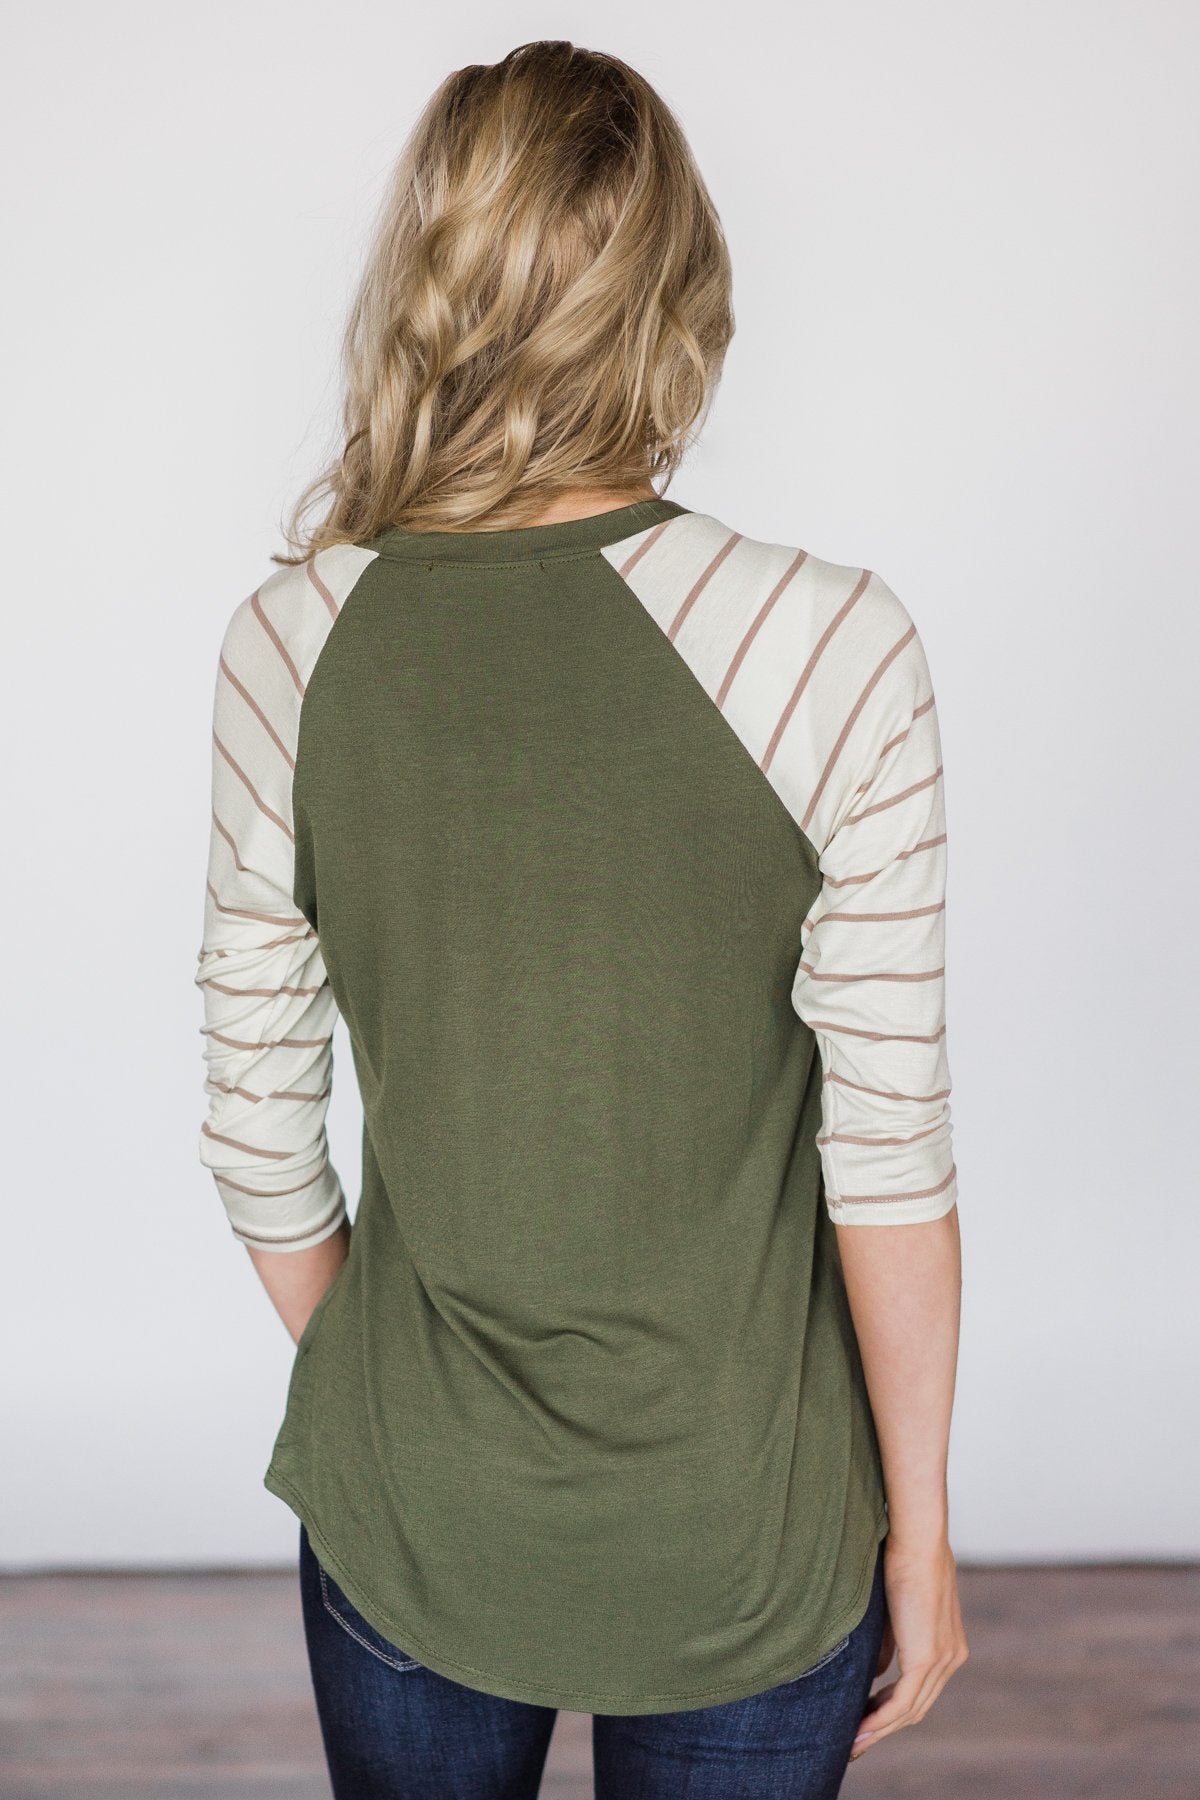 Olive & Taupe Striped Sleeve Baseball Top